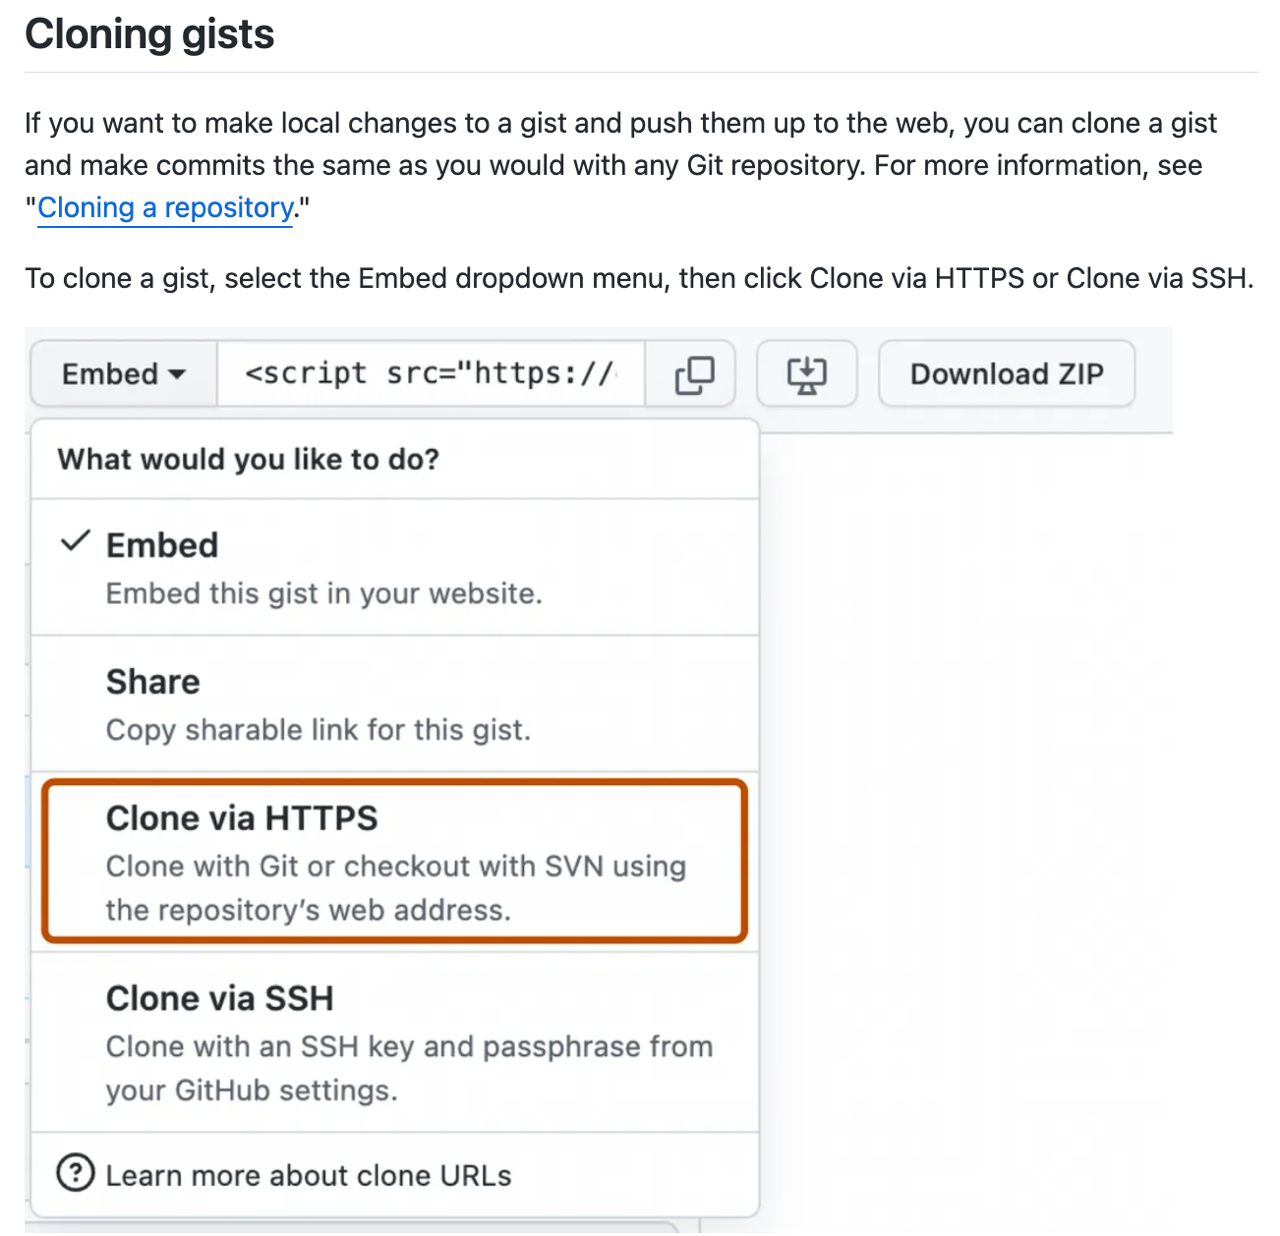 Screenshot of an article showing instructions and a UI screenshot for cloning a gist on GitHub.